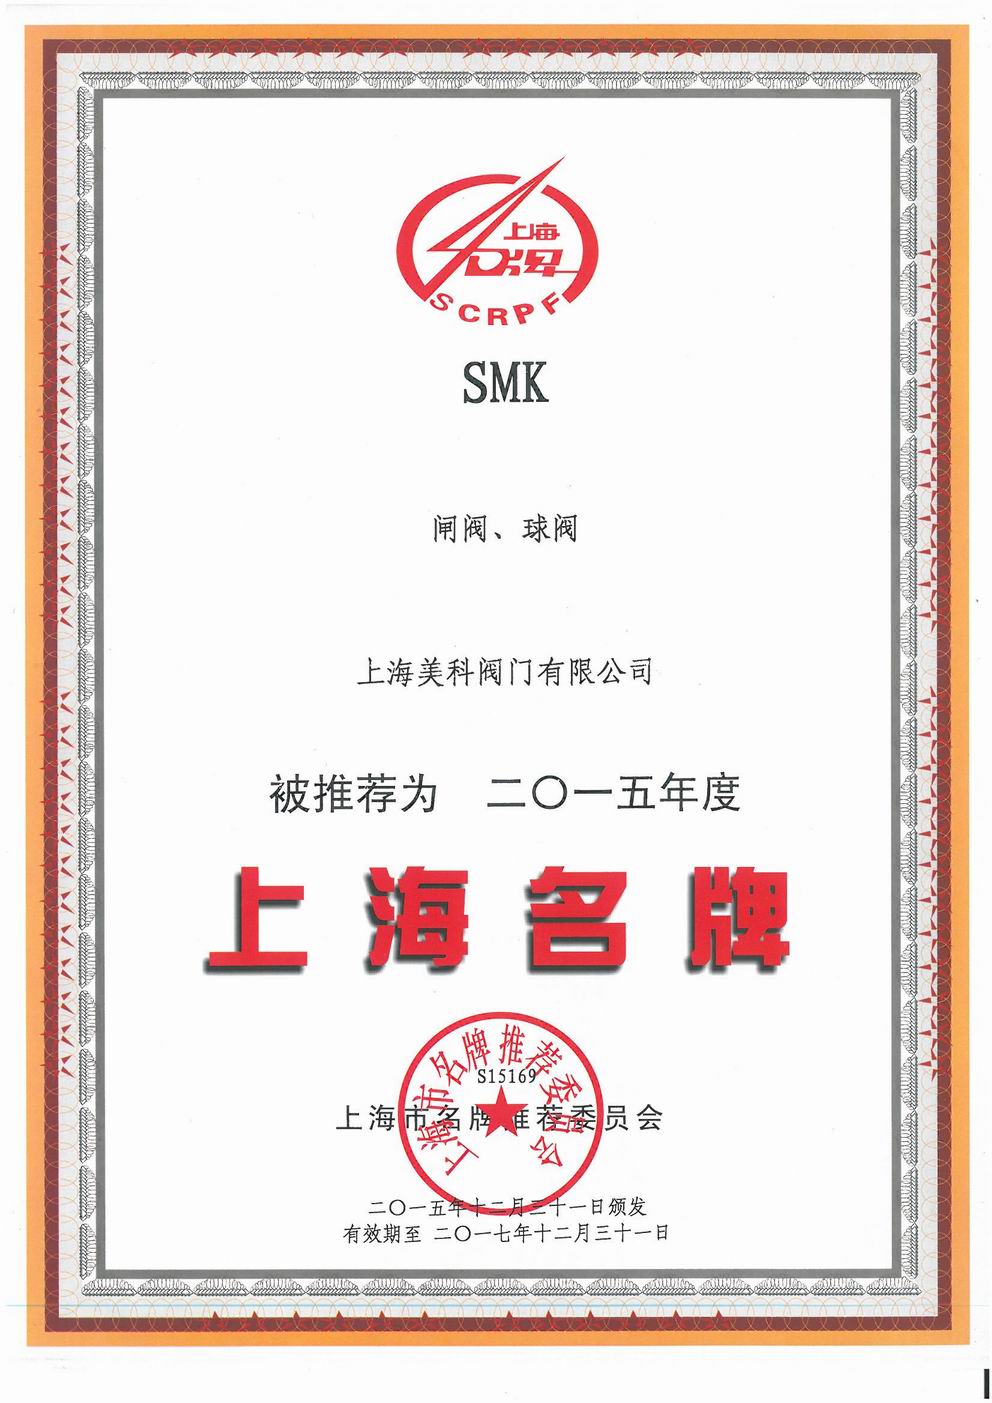 Certificate of Famous Brand in Shanghai